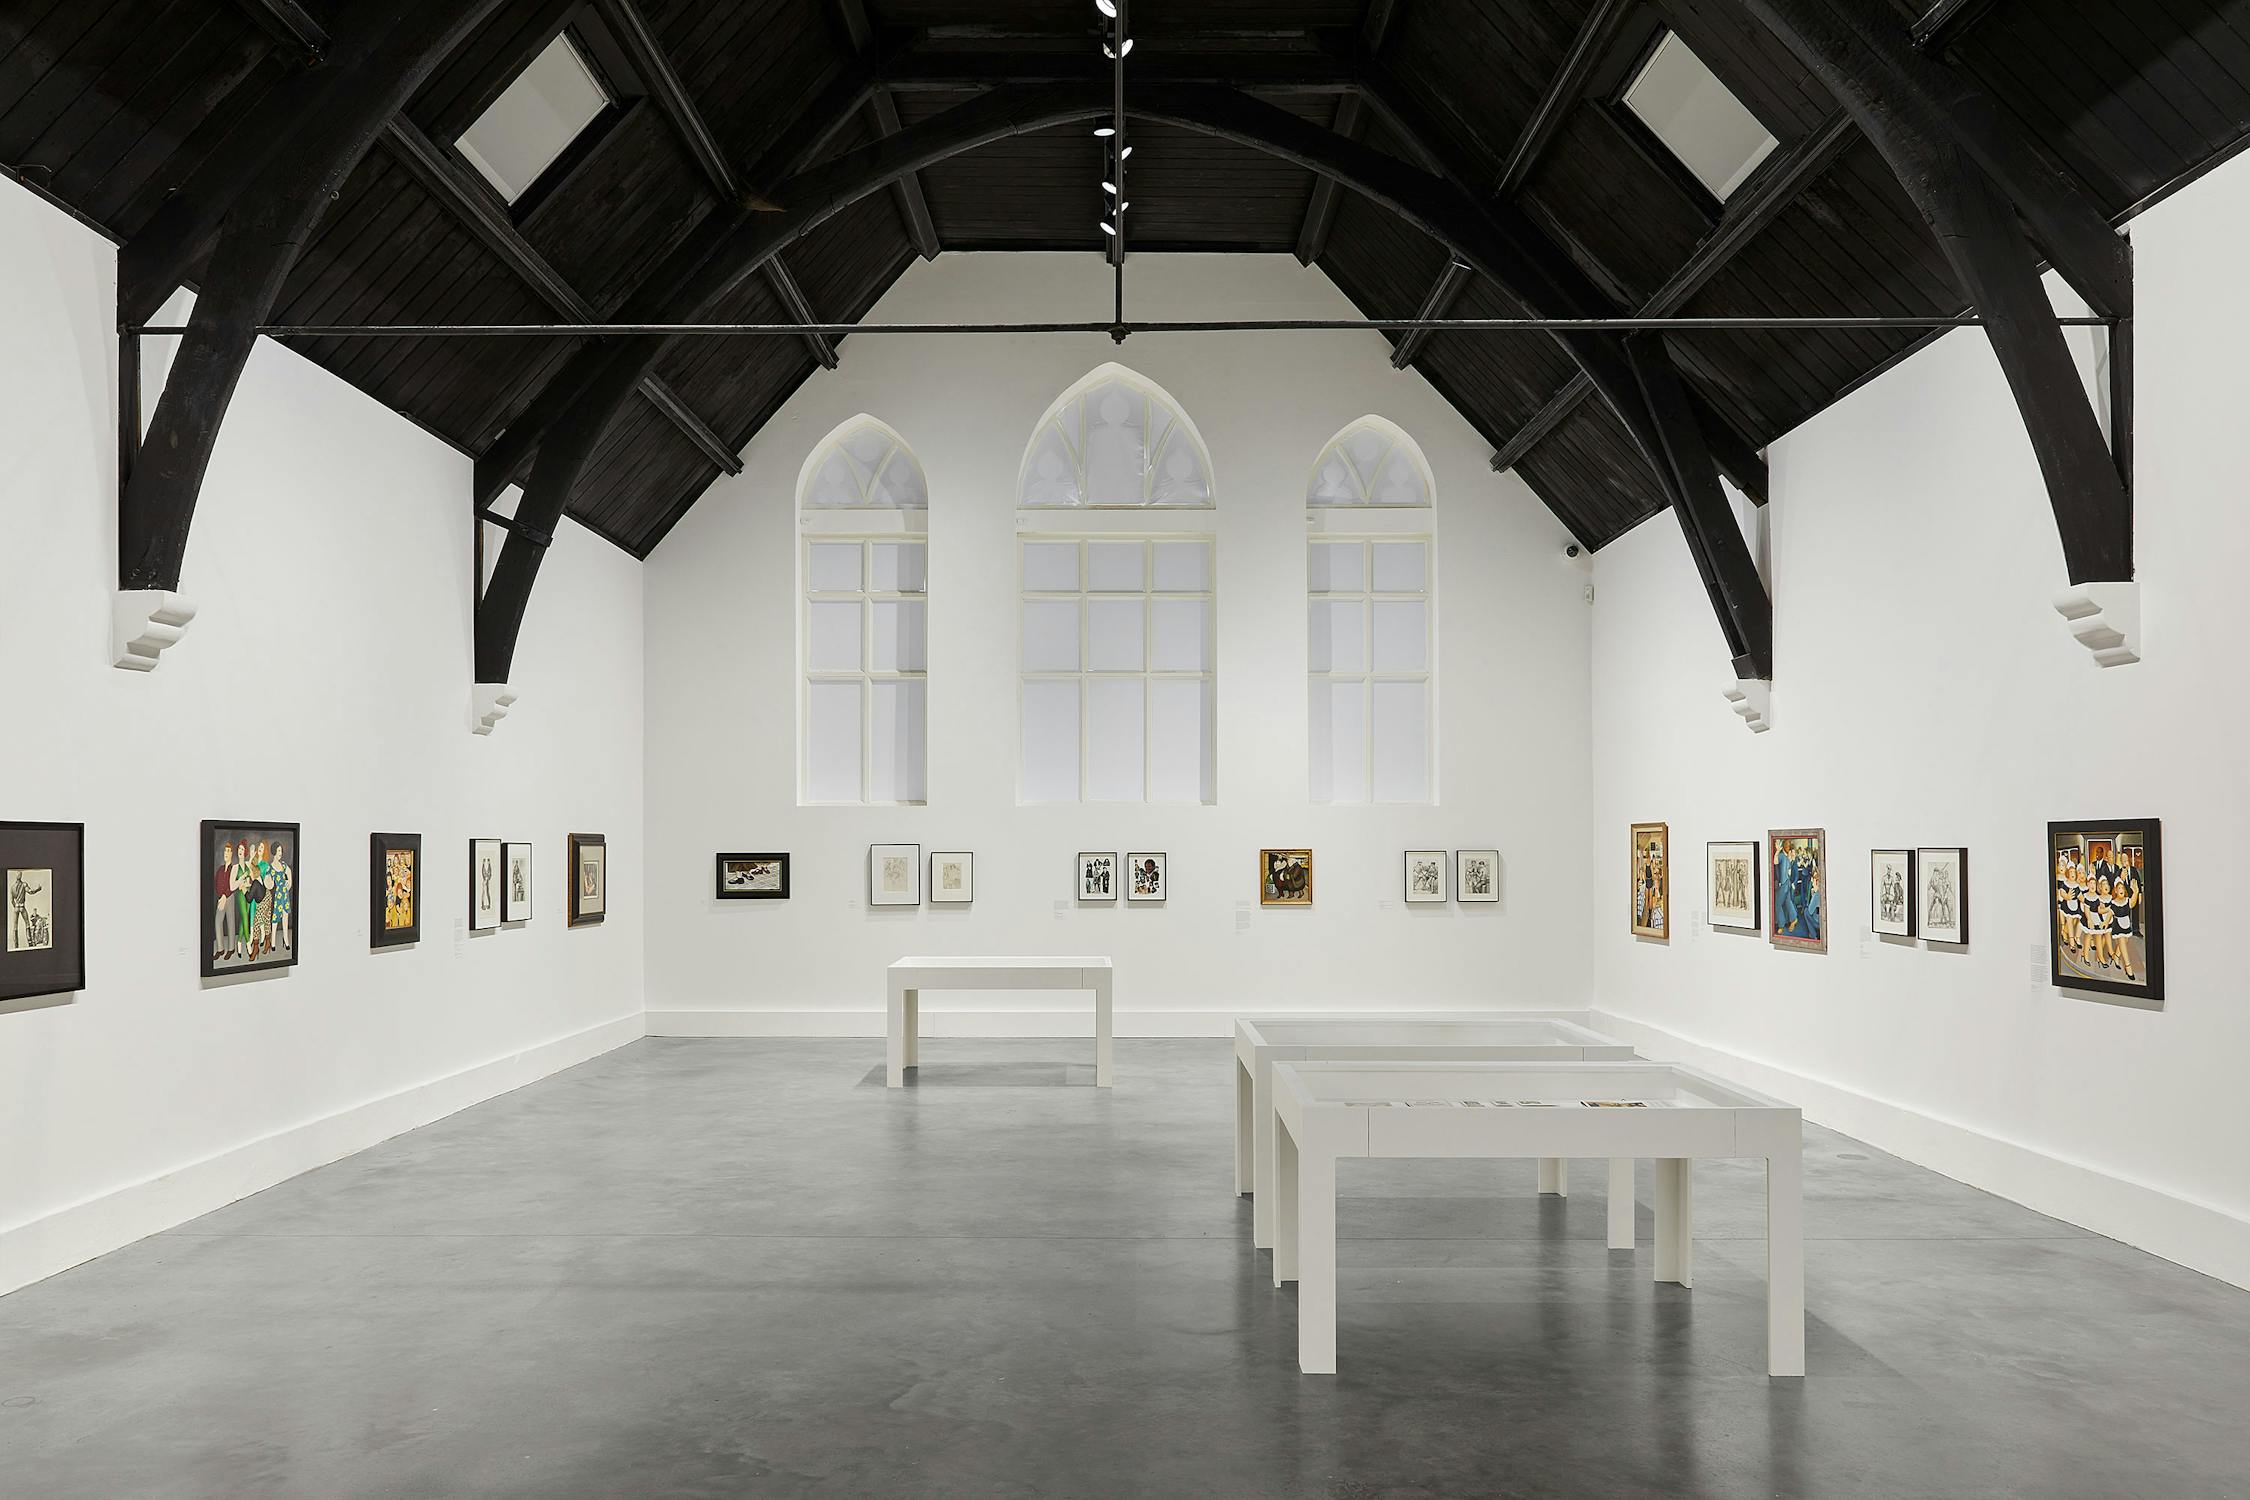 a brightly-lit gallery with white walls, dark vaulted ceiling and polished concrete floors. Artworks by Beryl Cook and Tom of Finland line the walls, and three vitrines are positioned within the space.